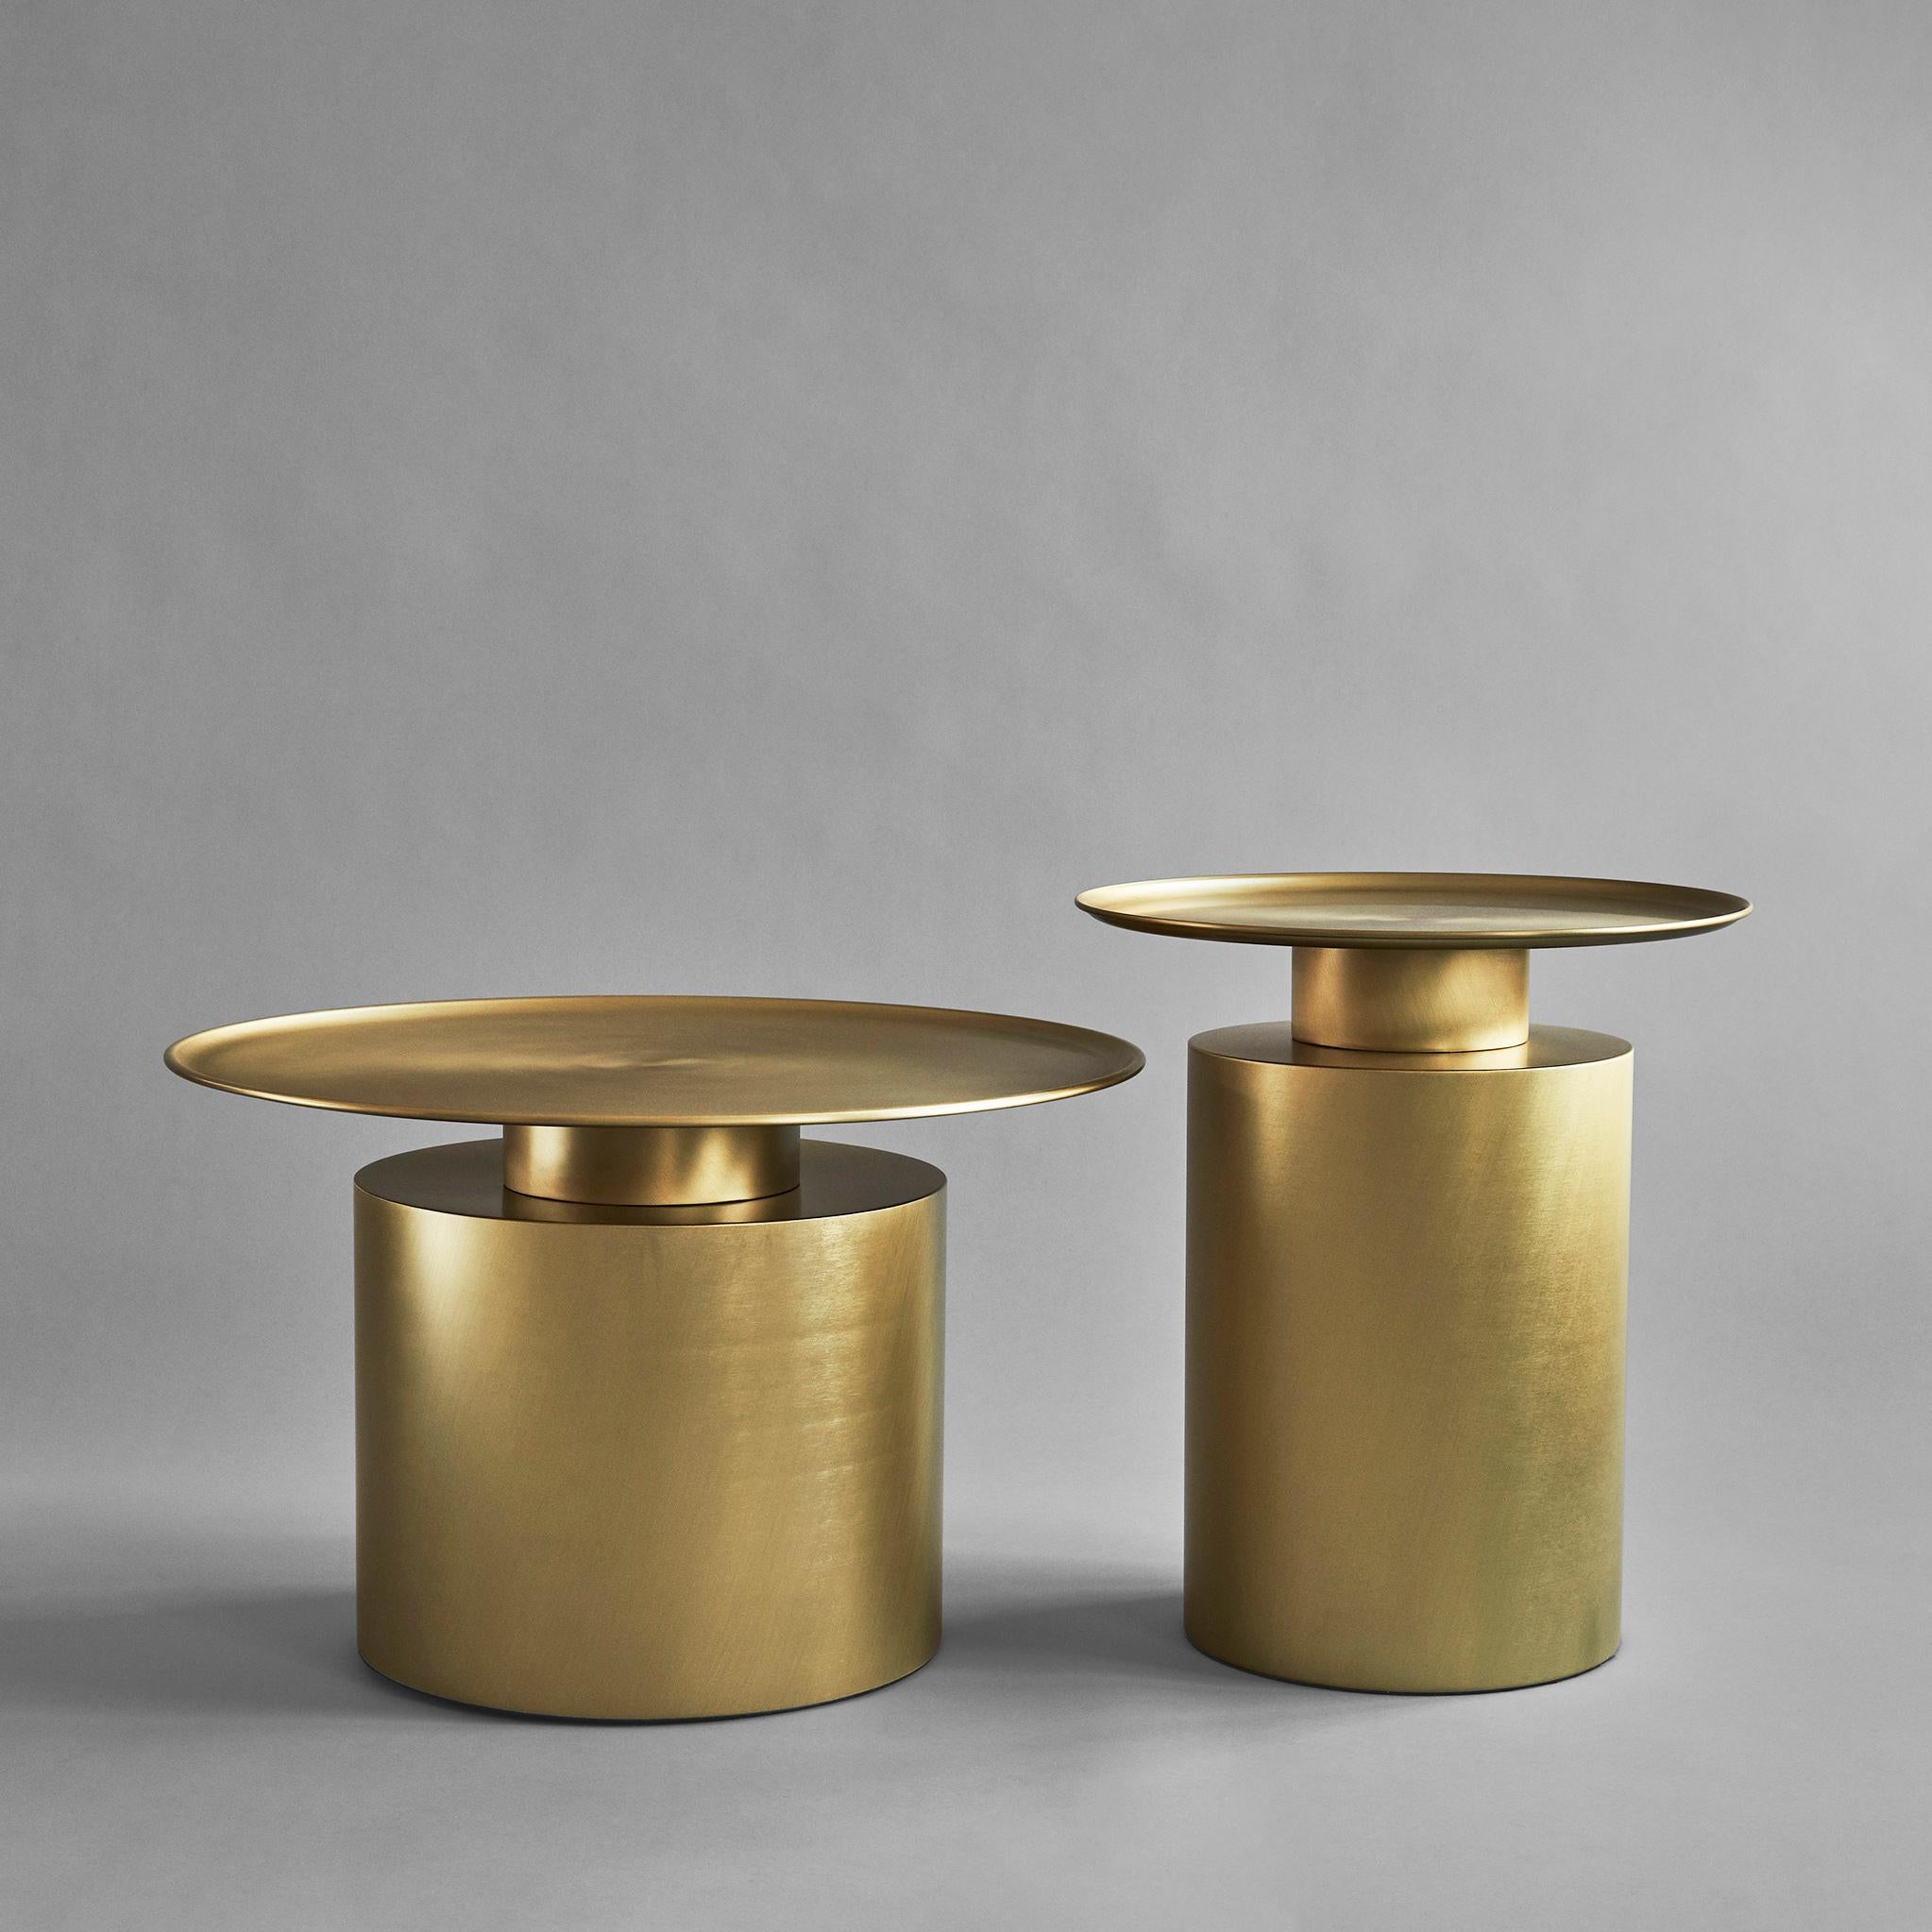 Brass pillar table tall by 101 Copenhagen.
Designed by Kristian Sofus Hansen & Tommy Hyldahl
Dimensions: L45 / W45 /H50 cm
Materials: plated metal

Pillar is inspired by the rich lustrous use of material in the 1930´s Art Deco movement. The coffee